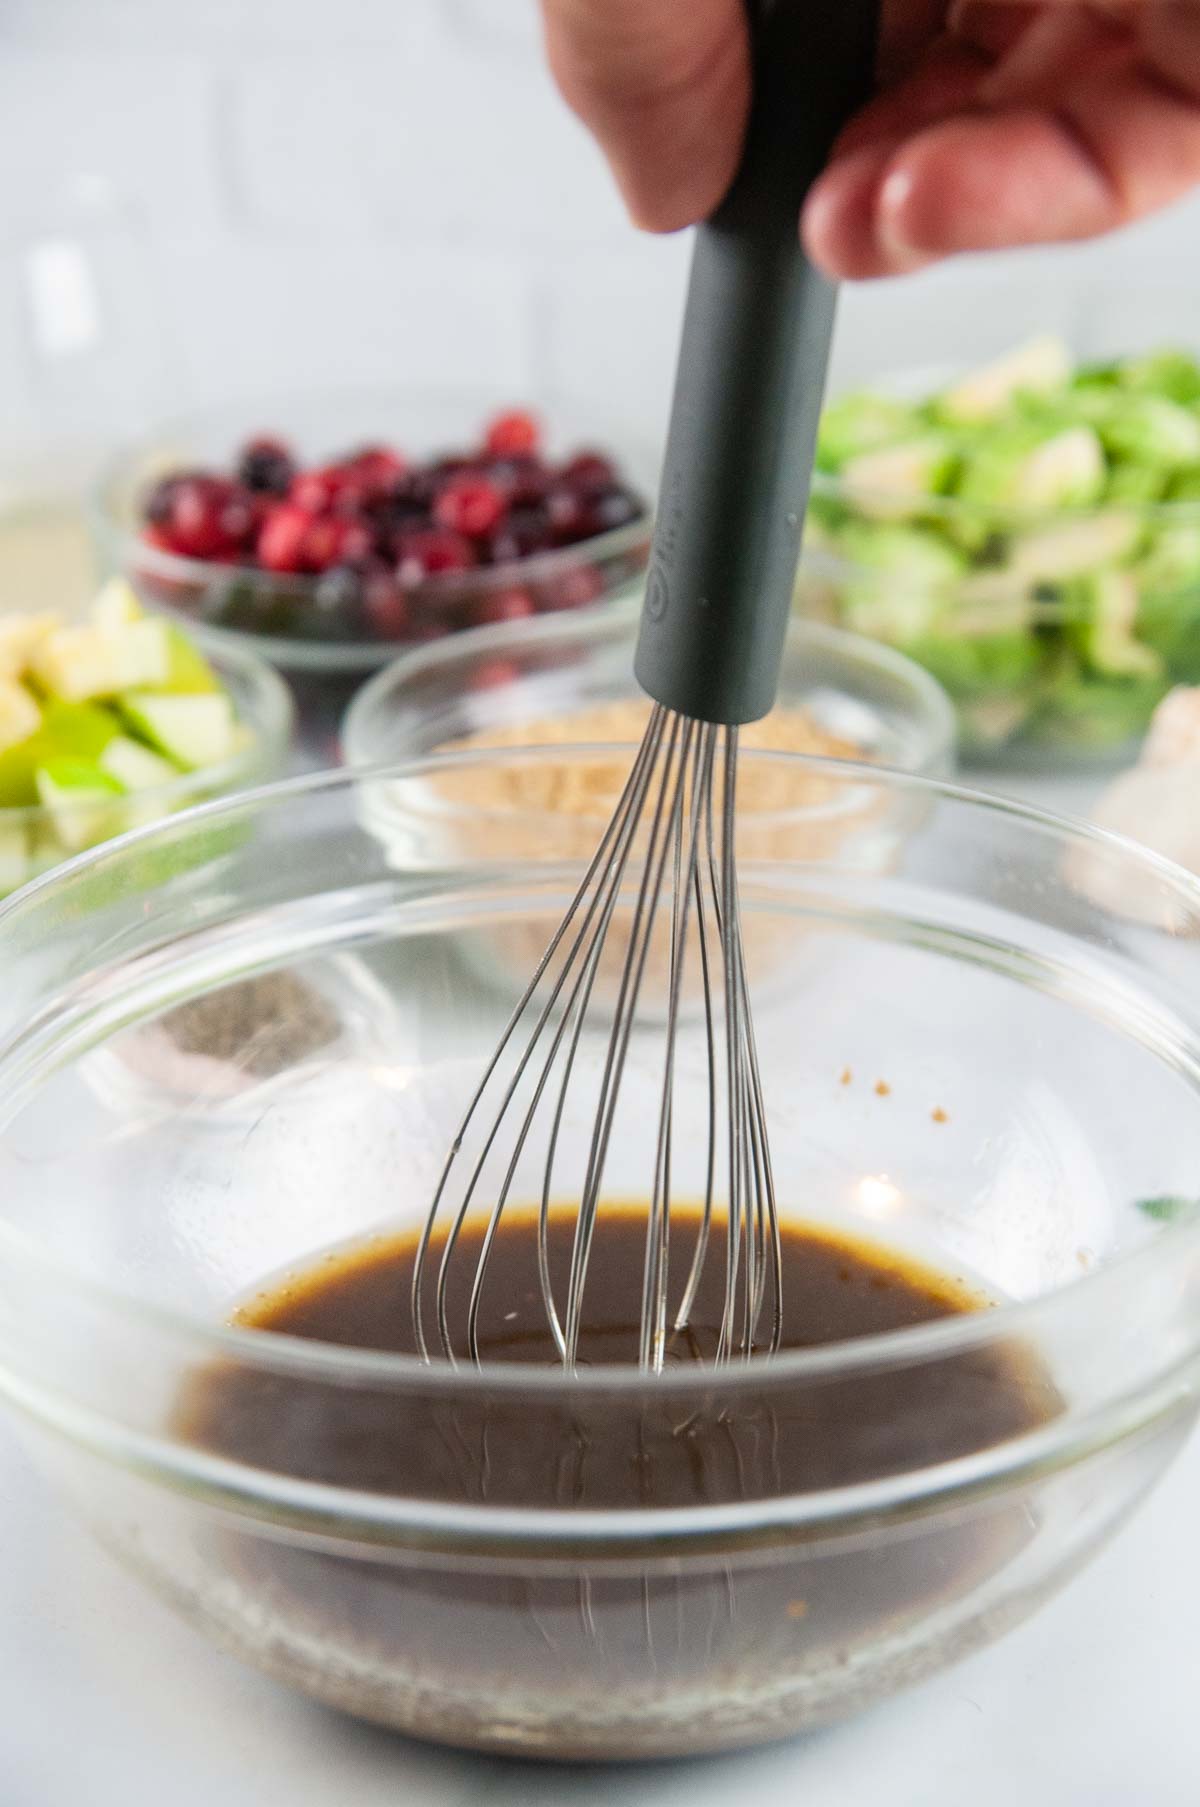 Whisk the marinade ingredients together